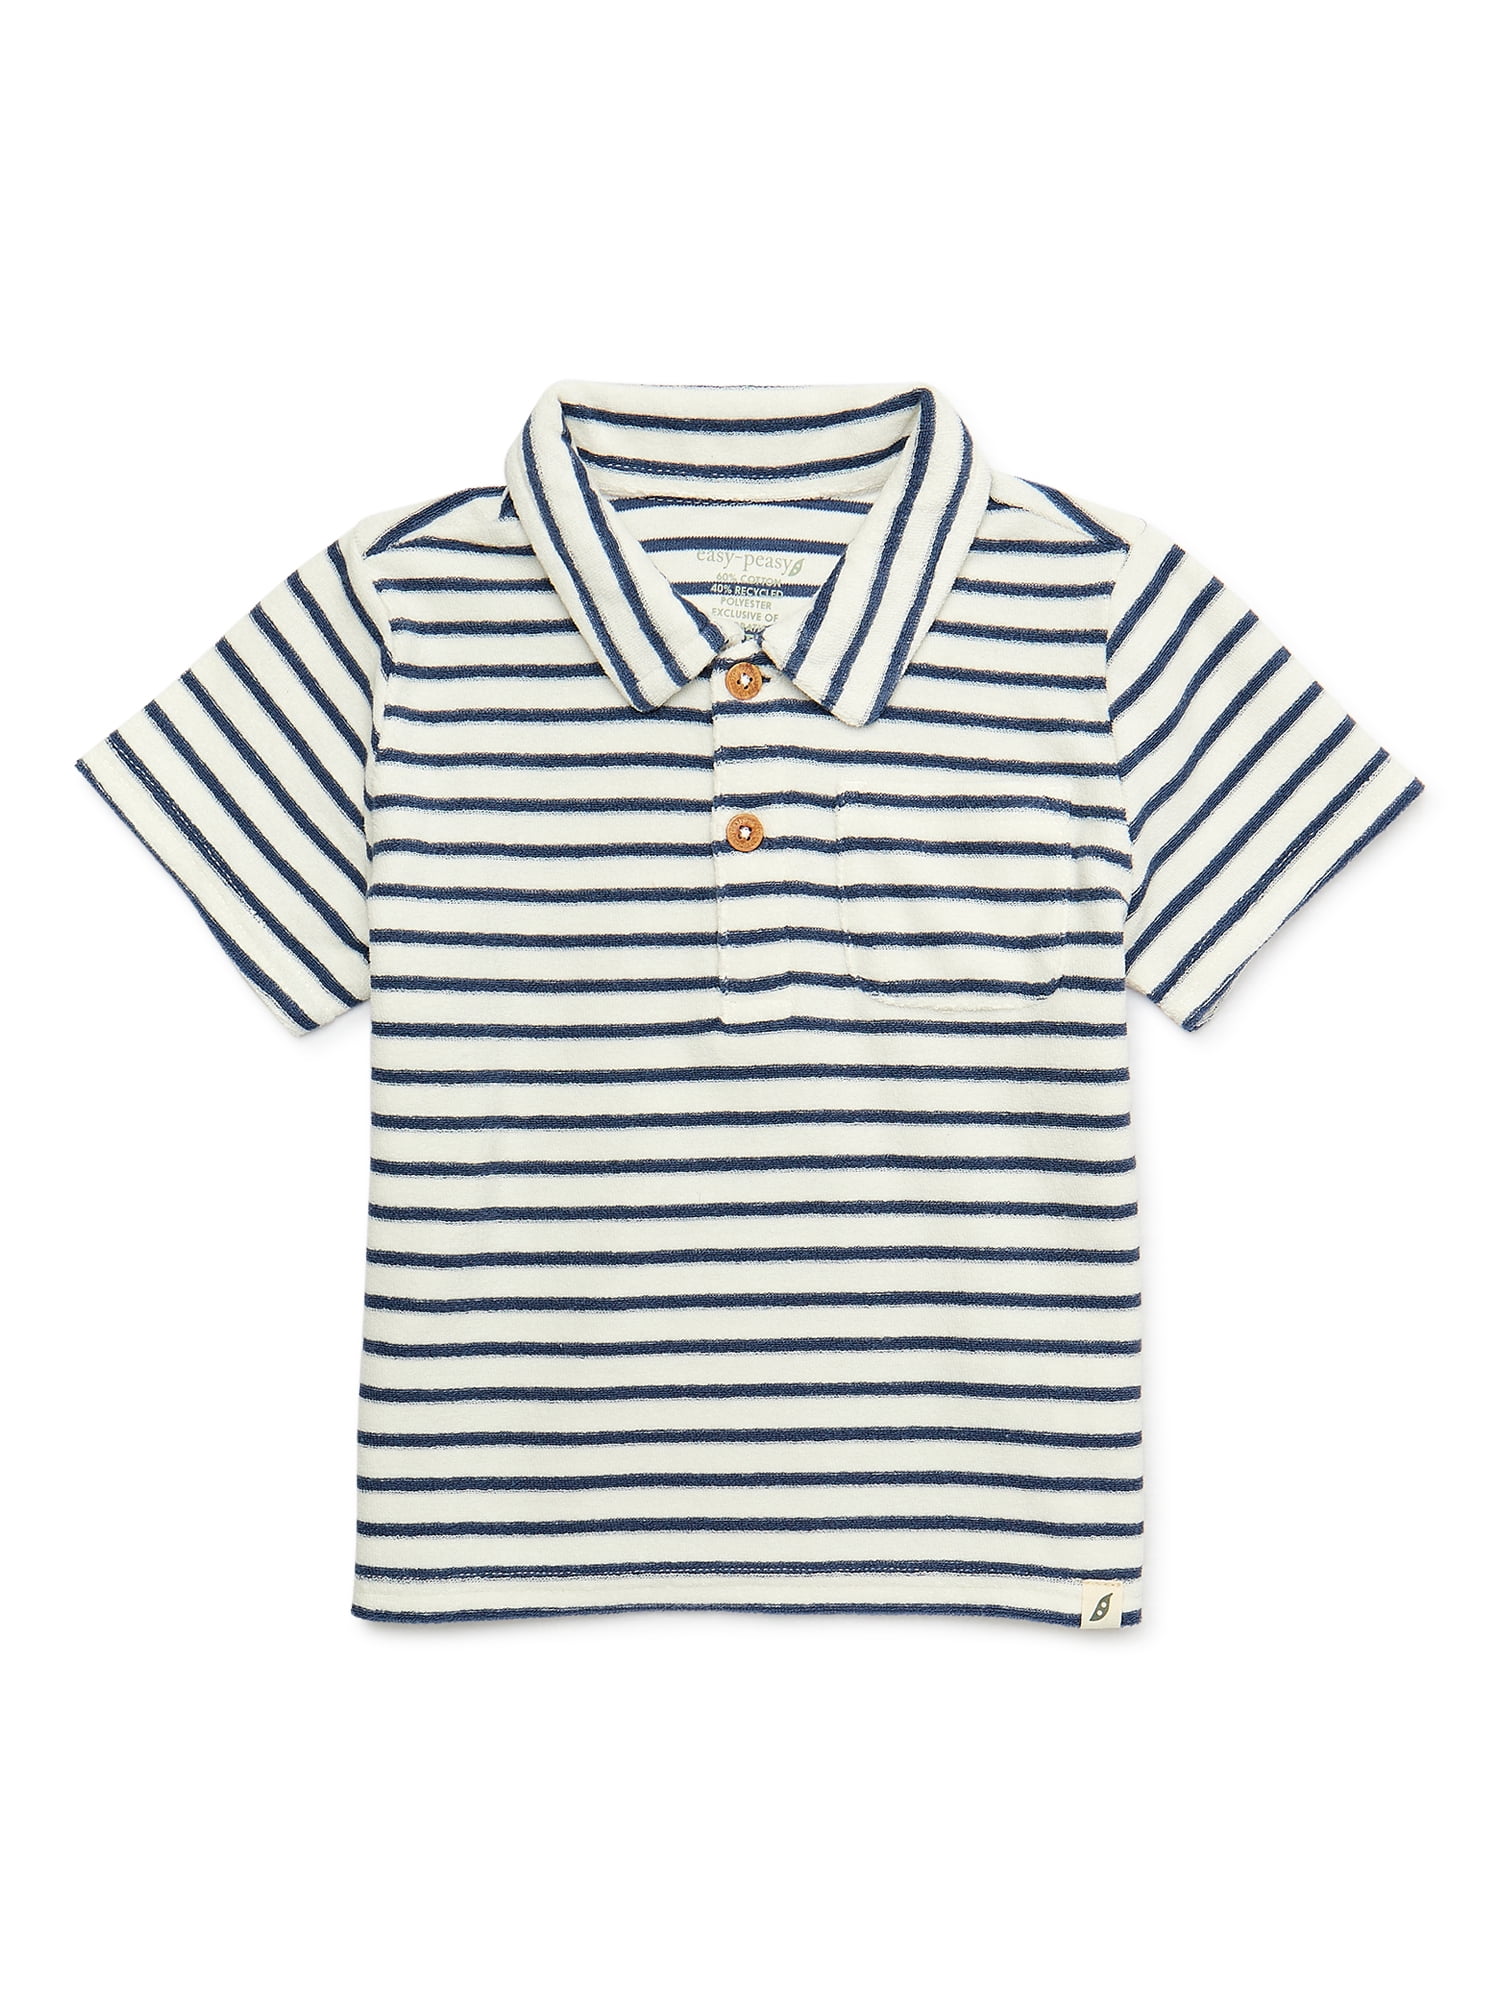 easy-peasy Toddler Boy Terry Short Sleeve Polo, Sizes 12M-5T